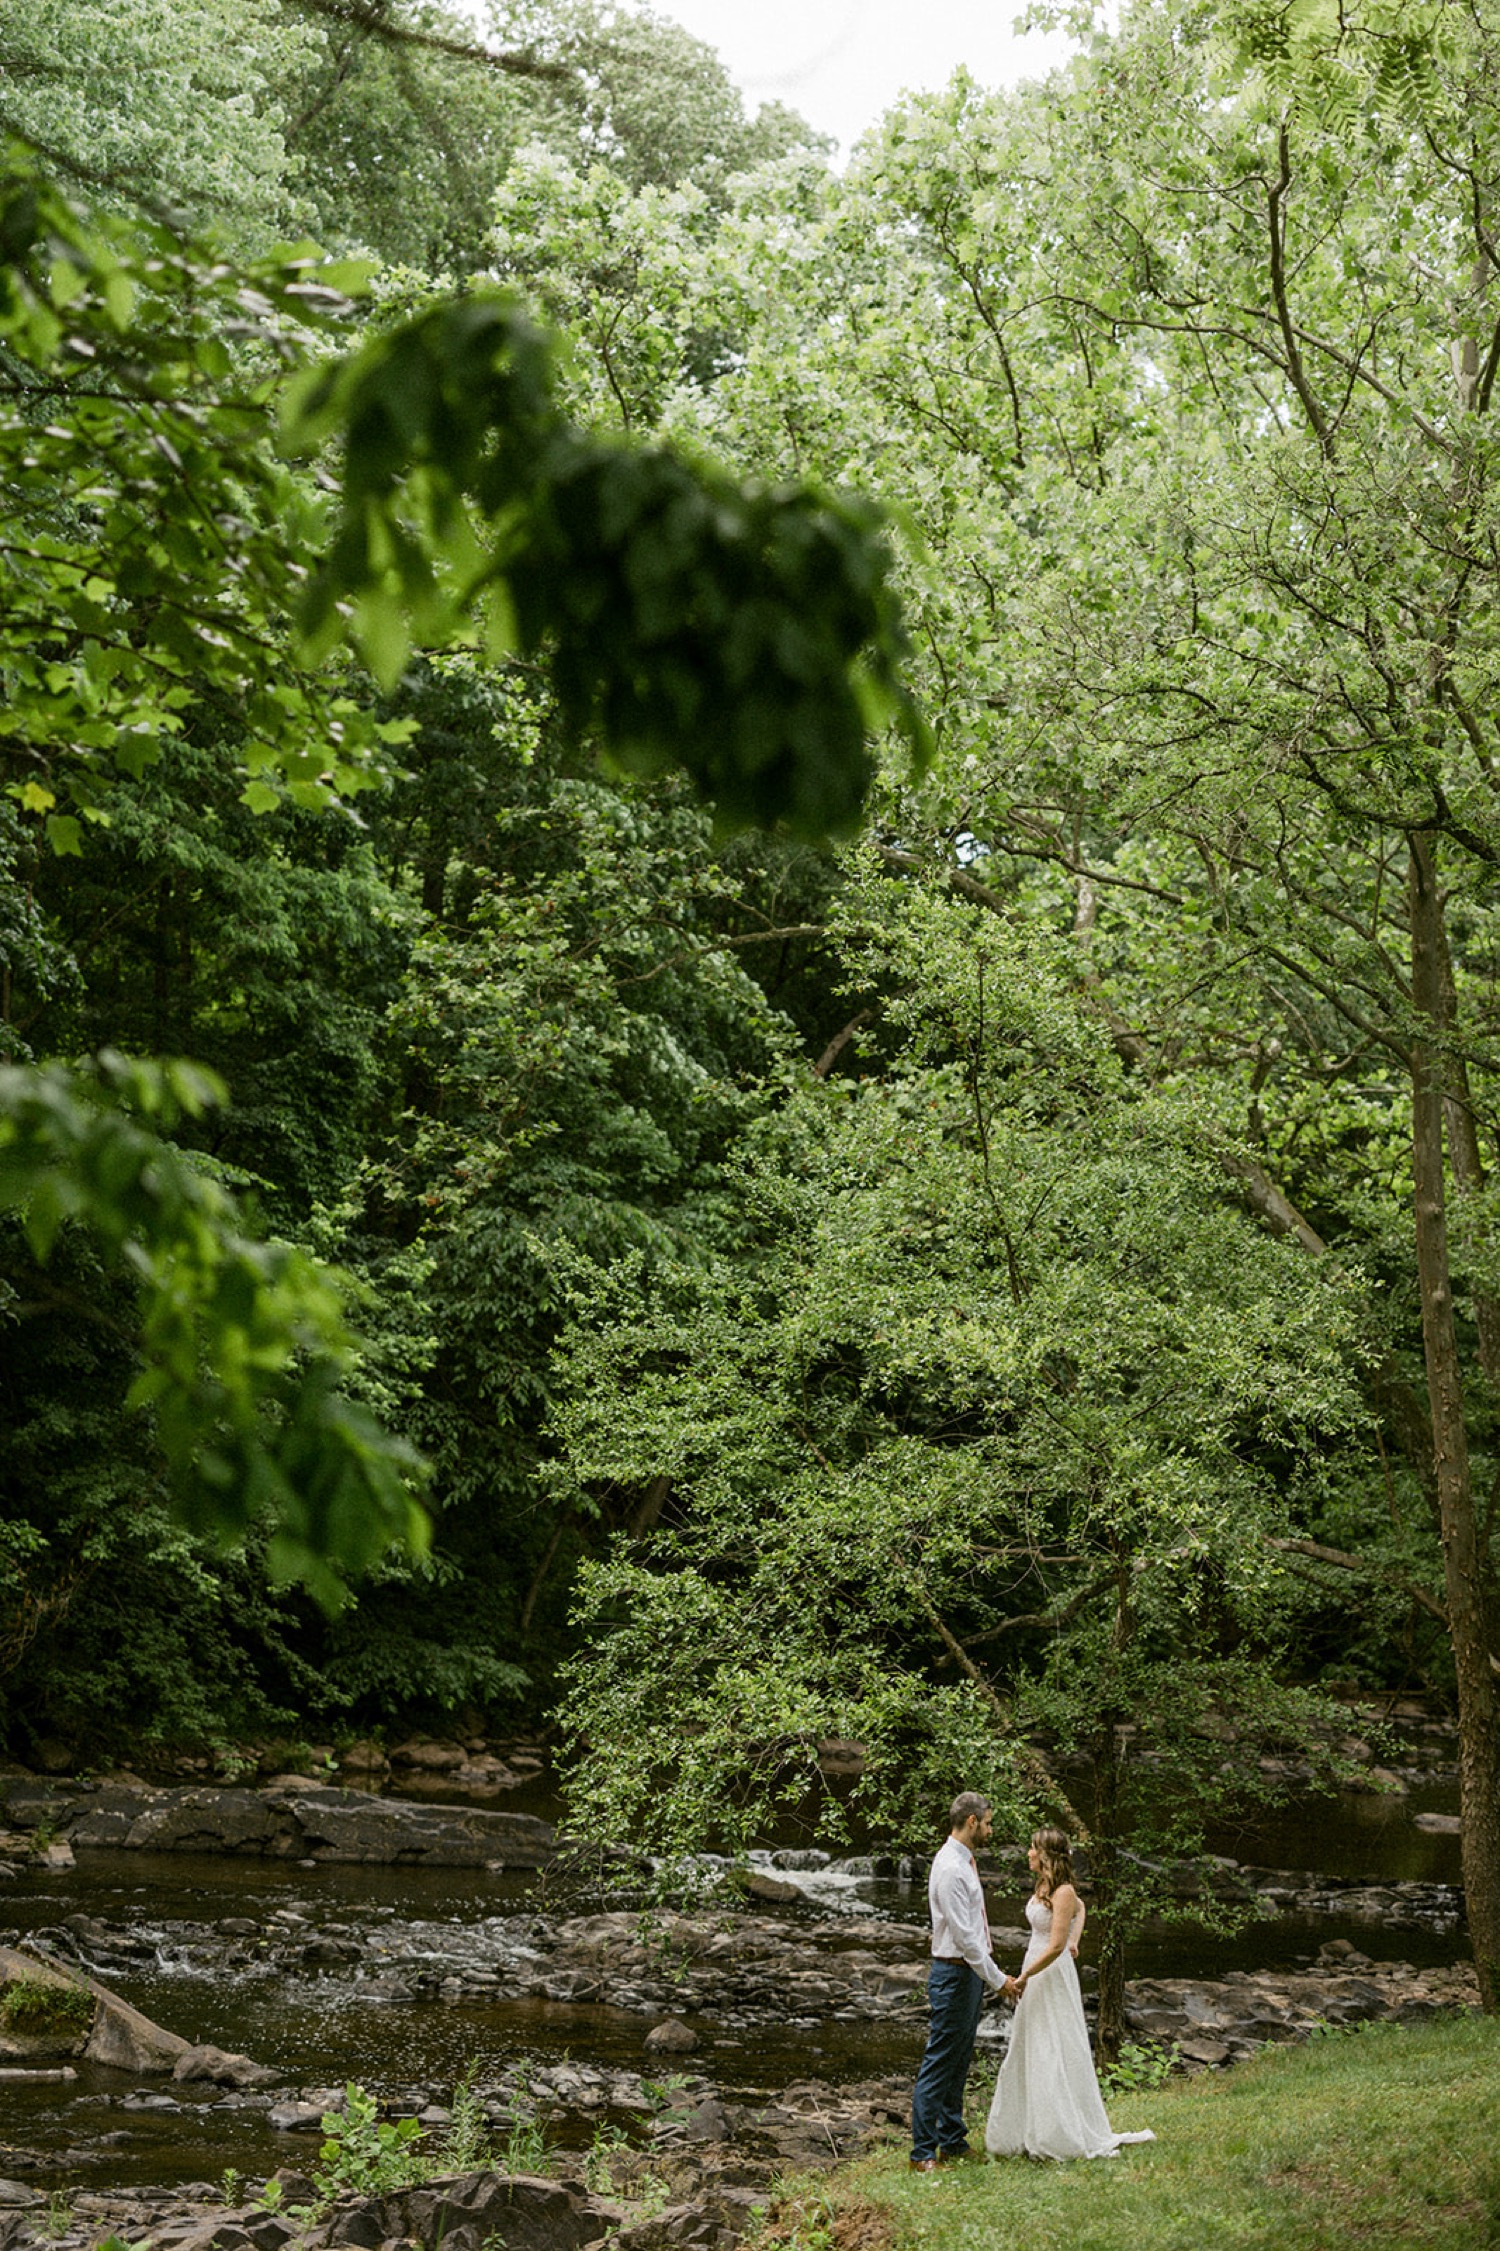 whimsical wedding session in nature